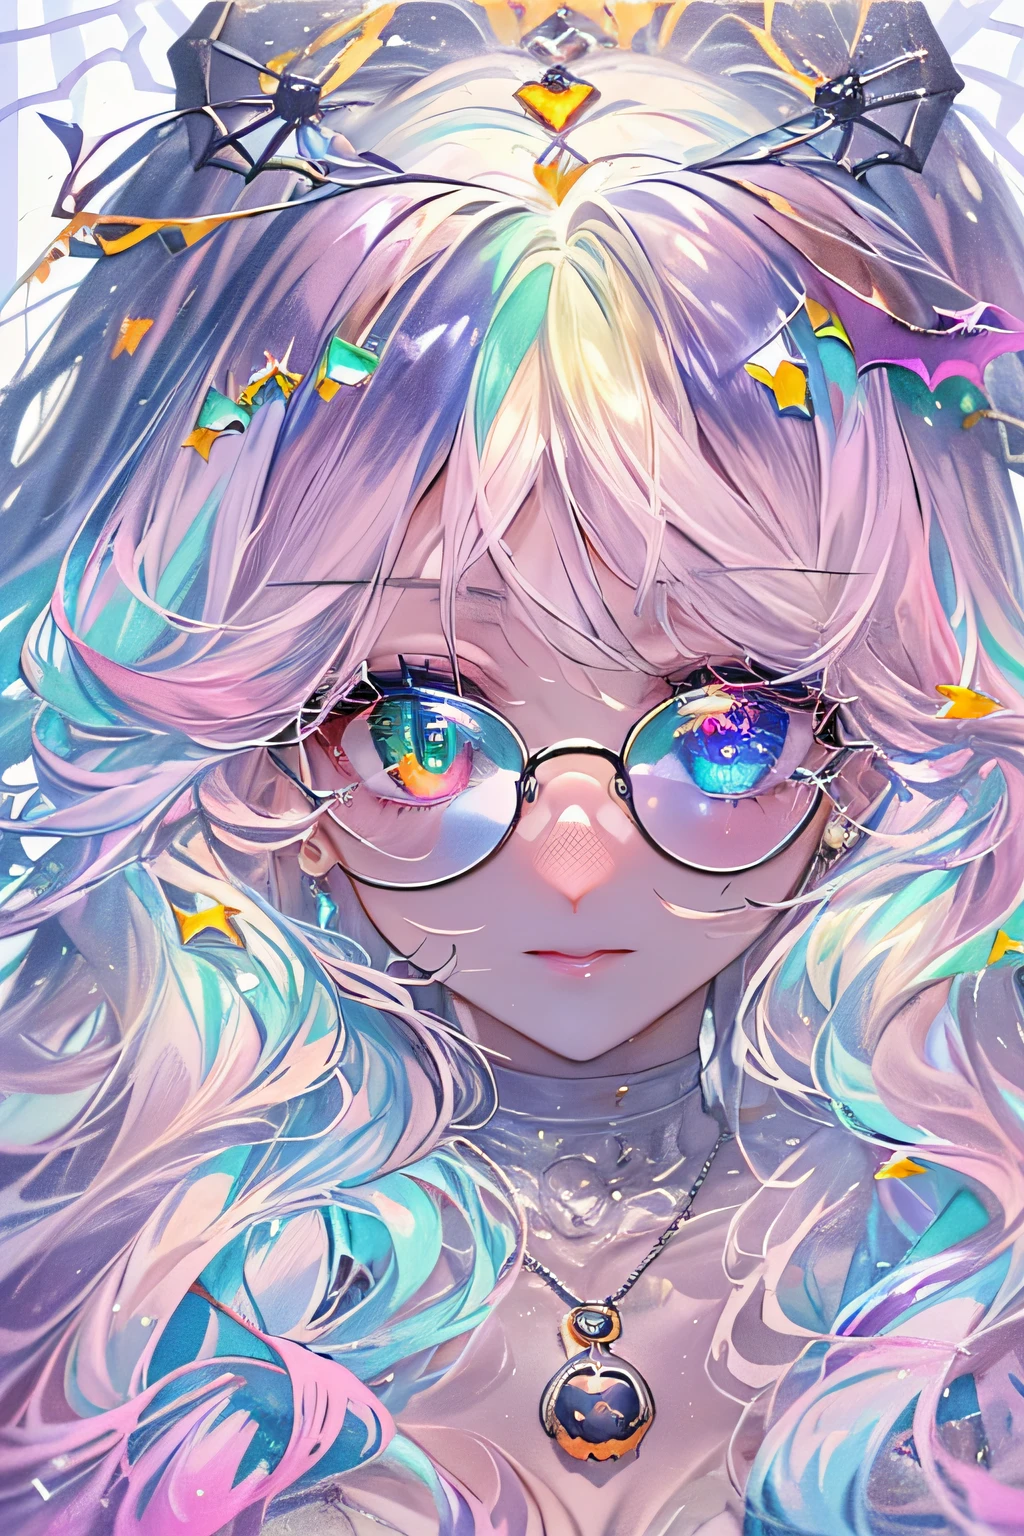 ((​masterpiece、top-quality、Watercolor art(Pendants)、Official art、Beautifully Aesthetic:1.2))、(1girl in:1.3)、(Fractal Art:1.3)、full body Esbian、((Glitter pupils))、patterns、((rainbow-colored hair、colourful hair、Half blue and half pink hair:1.2))、colourfull、(Silver-rimmed glasses)、Writing、(heterochromia iridis:1.5)、(colourfull:1.5)、((Shy face))、one piece dress、(Standing)、(Hyper-detailing), ((delicate detail)), (intricate detailes), ((ciinematic light, best quality backlight)), highcontrast, ((The best lighting, extremely delicate and beautiful)), ((ciinematic light))、(ray trace reflection、brilliance)、((glowing aura))、((Radiant hair))、((The ultra-detailliert))、((8K)),(((Halloween:1.2))),（natta:1.5)